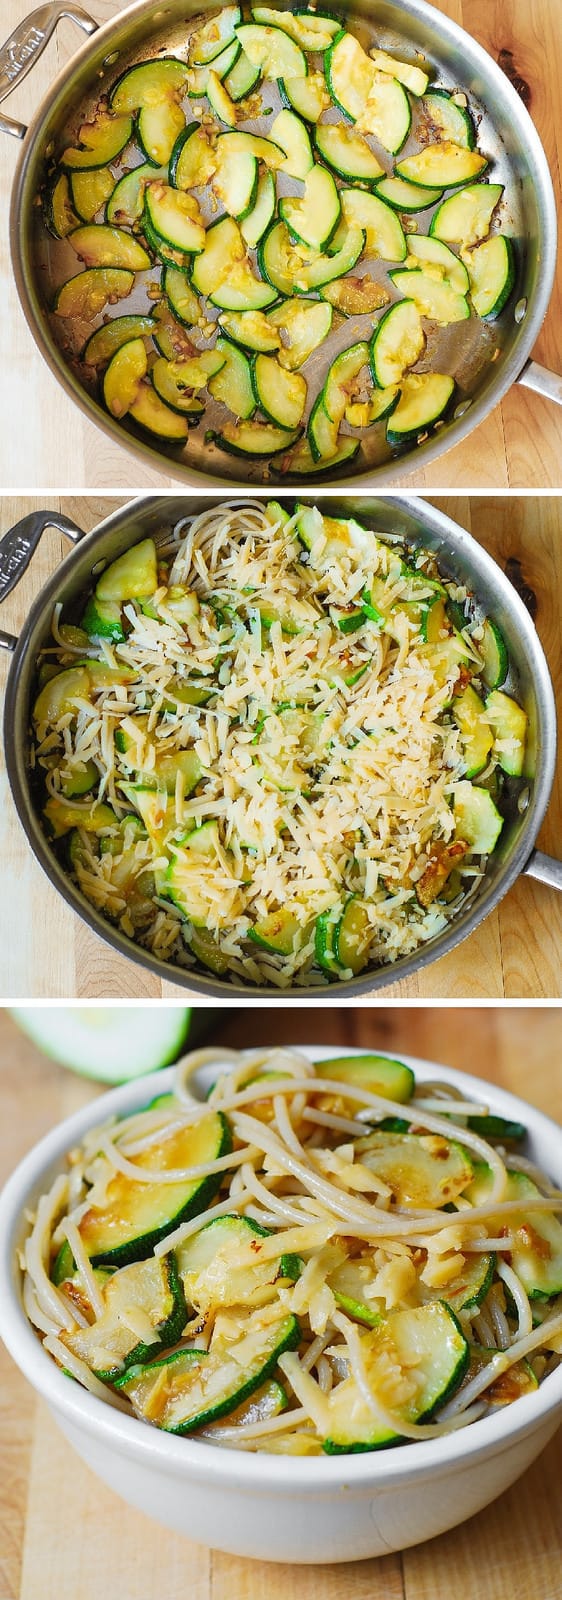 step by step photos to show how to cook pasta with zucchini